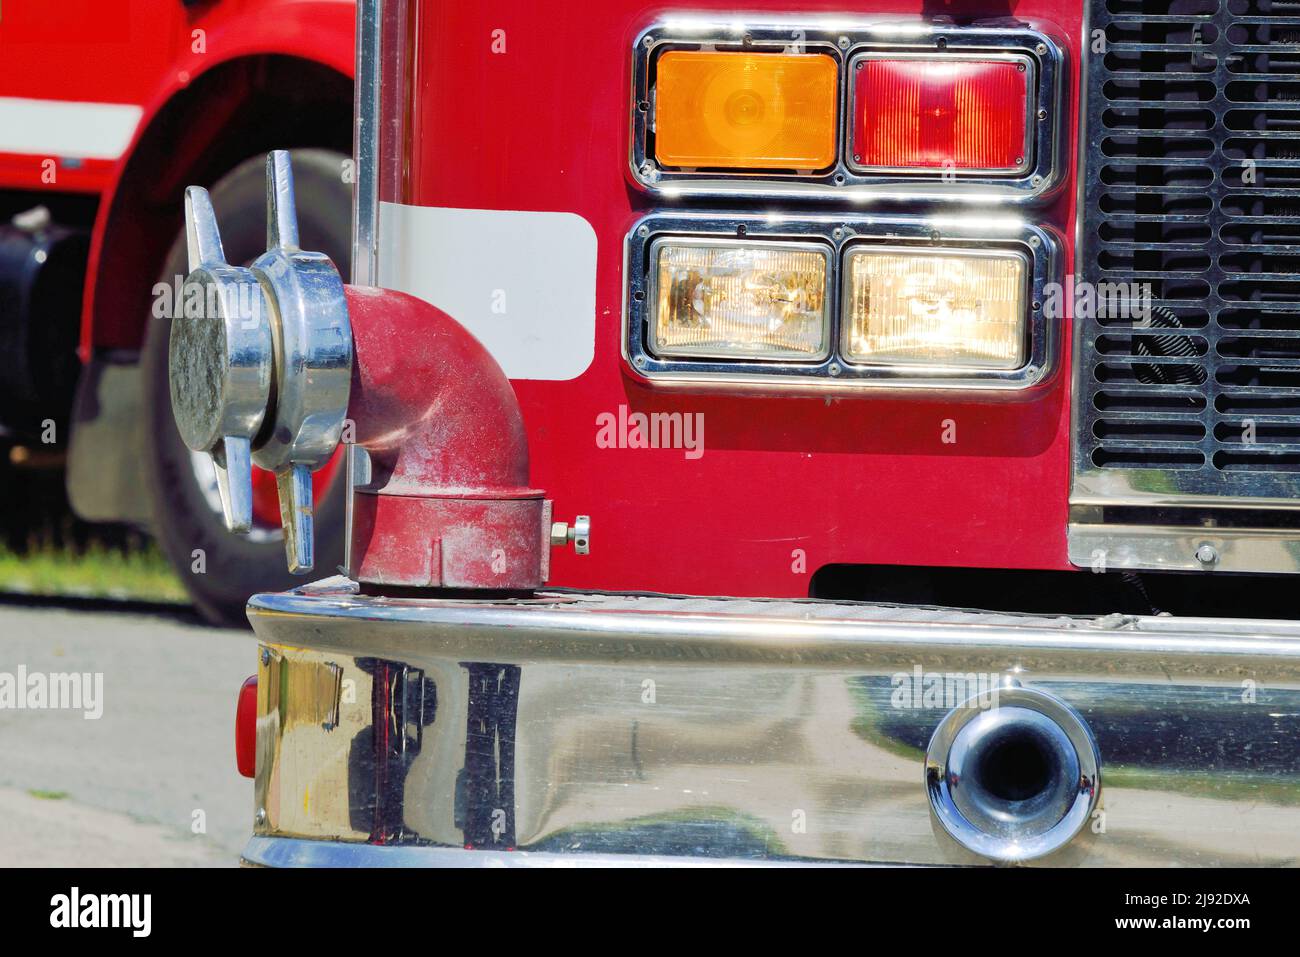 Isolated rear of an emergency vehicle, with bank of lights that wilil flash when needed. Stock Photo